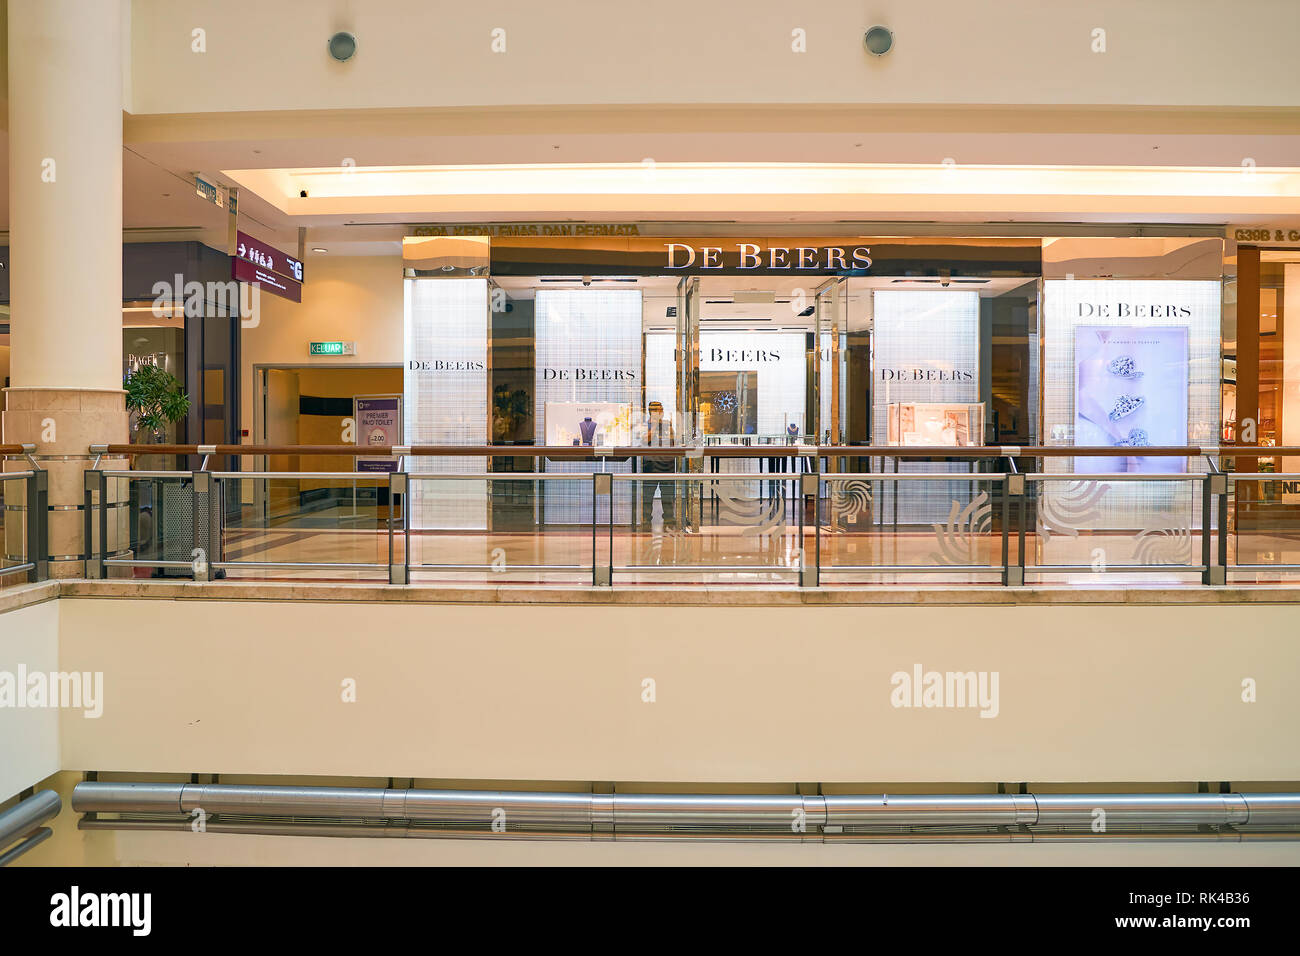 KUALA LUMPUR, MALAYSIA - MAY 09, 2016: inside of Suria KLCC. Suria KLCC is a shopping mall is located in the Kuala Lumpur City Centre district. It is  Stock Photo